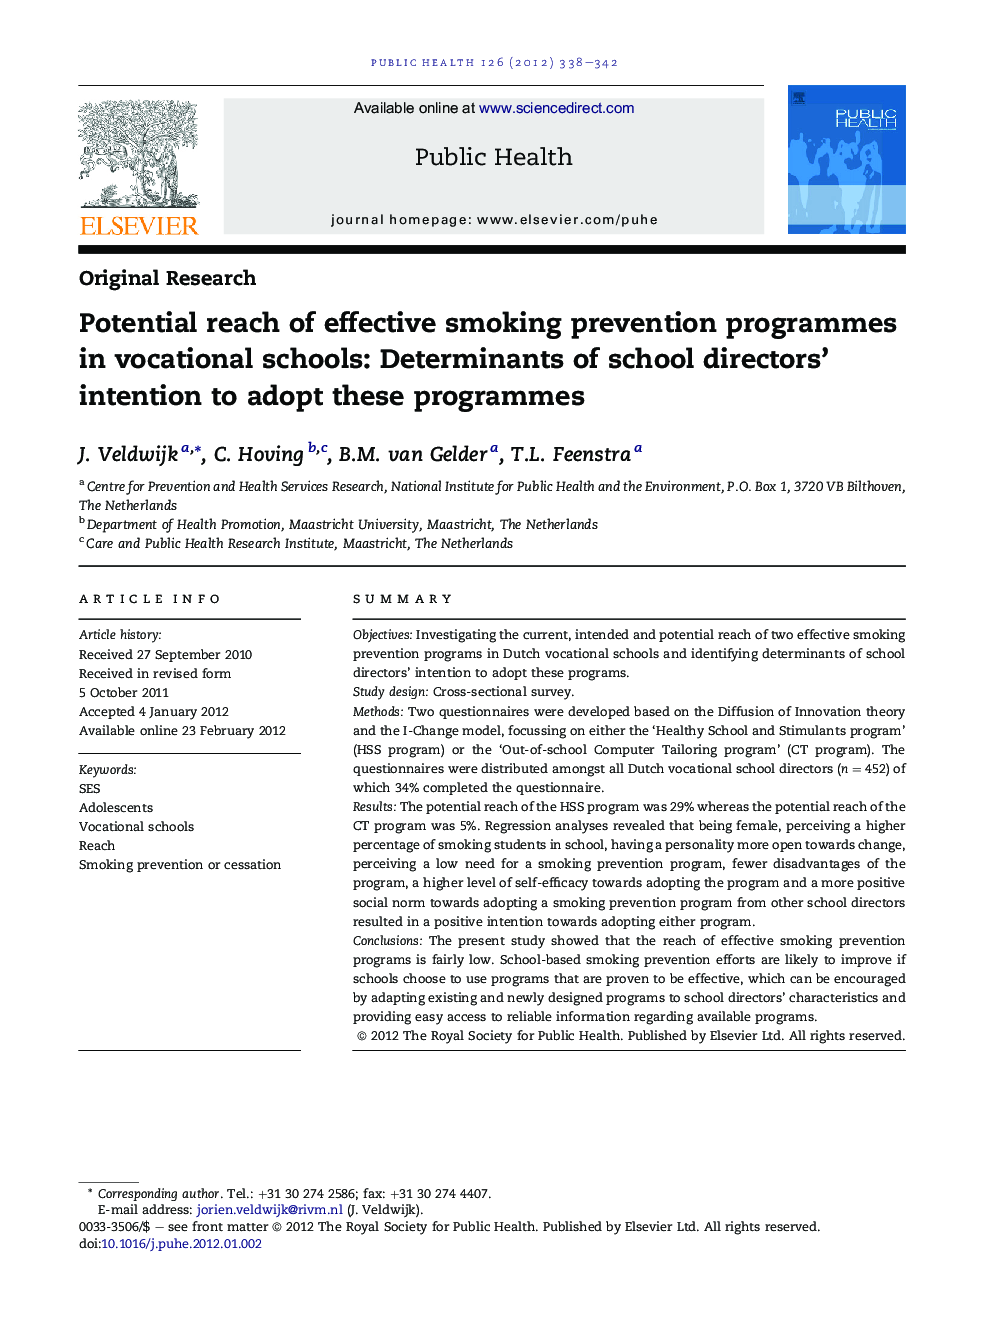 Potential reach of effective smoking prevention programmes in vocational schools: Determinants of school directors’ intention to adopt these programmes